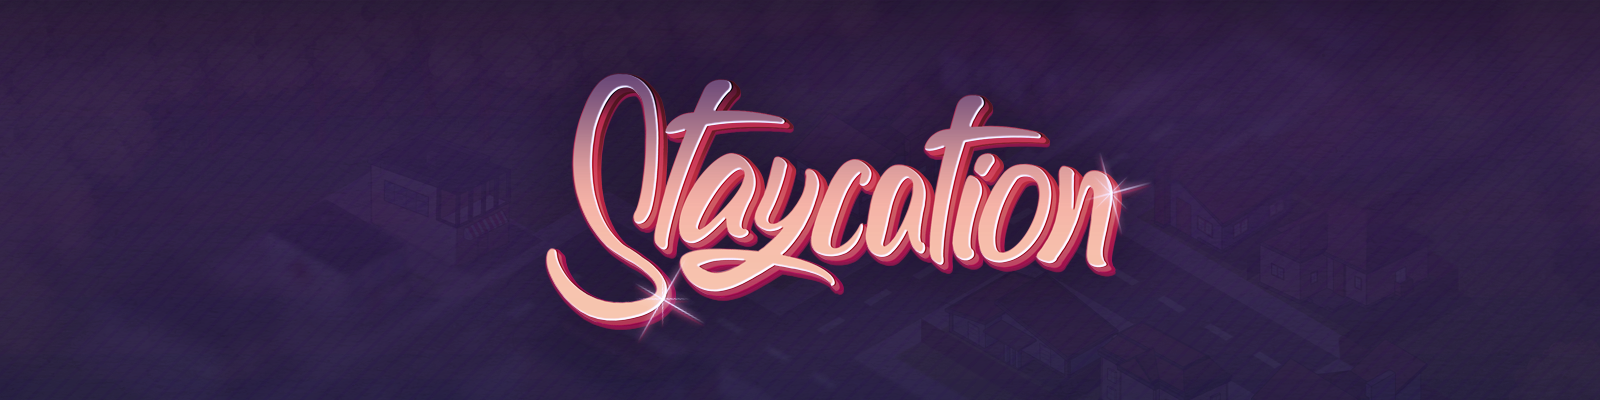 Staycation poster